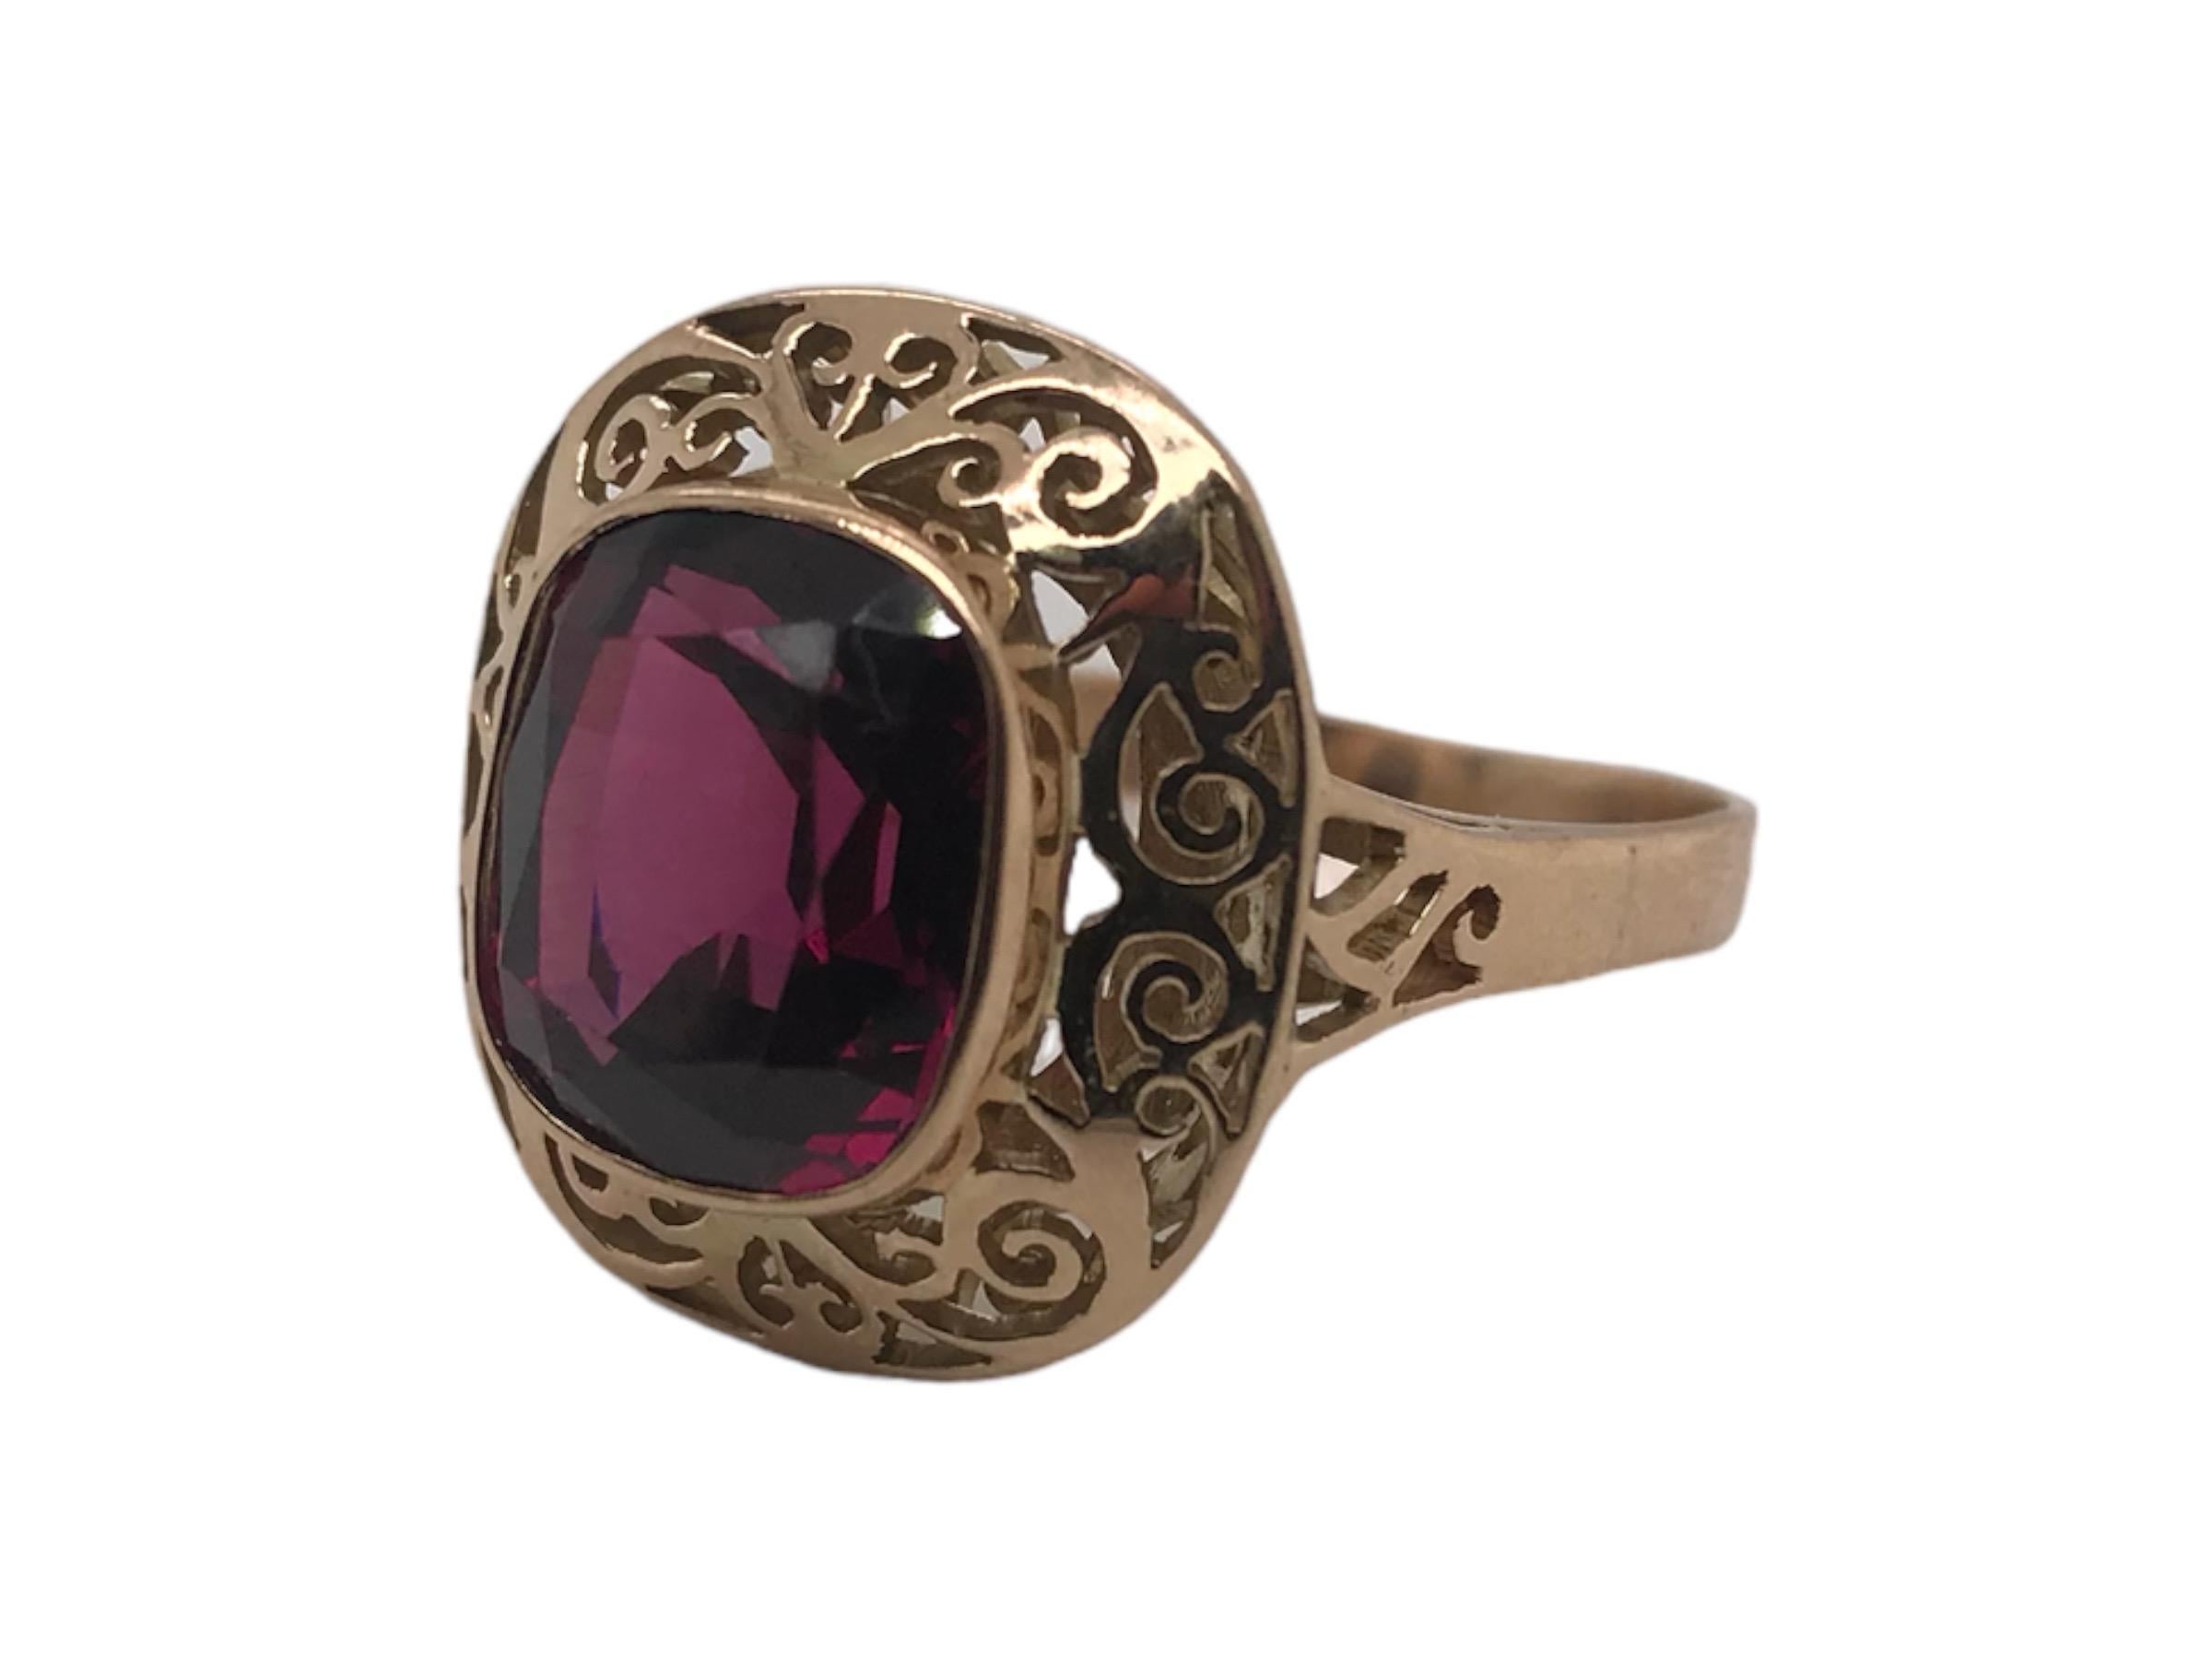 This lovely ring features a stunning Rhodolite Garnet Gemstone, approximately 6.5 Carats.
The ring features lovely filigree accents and has a great presence on the finger.
Rhodolite garnets are known for their rich purple to pink hues. 

Finger